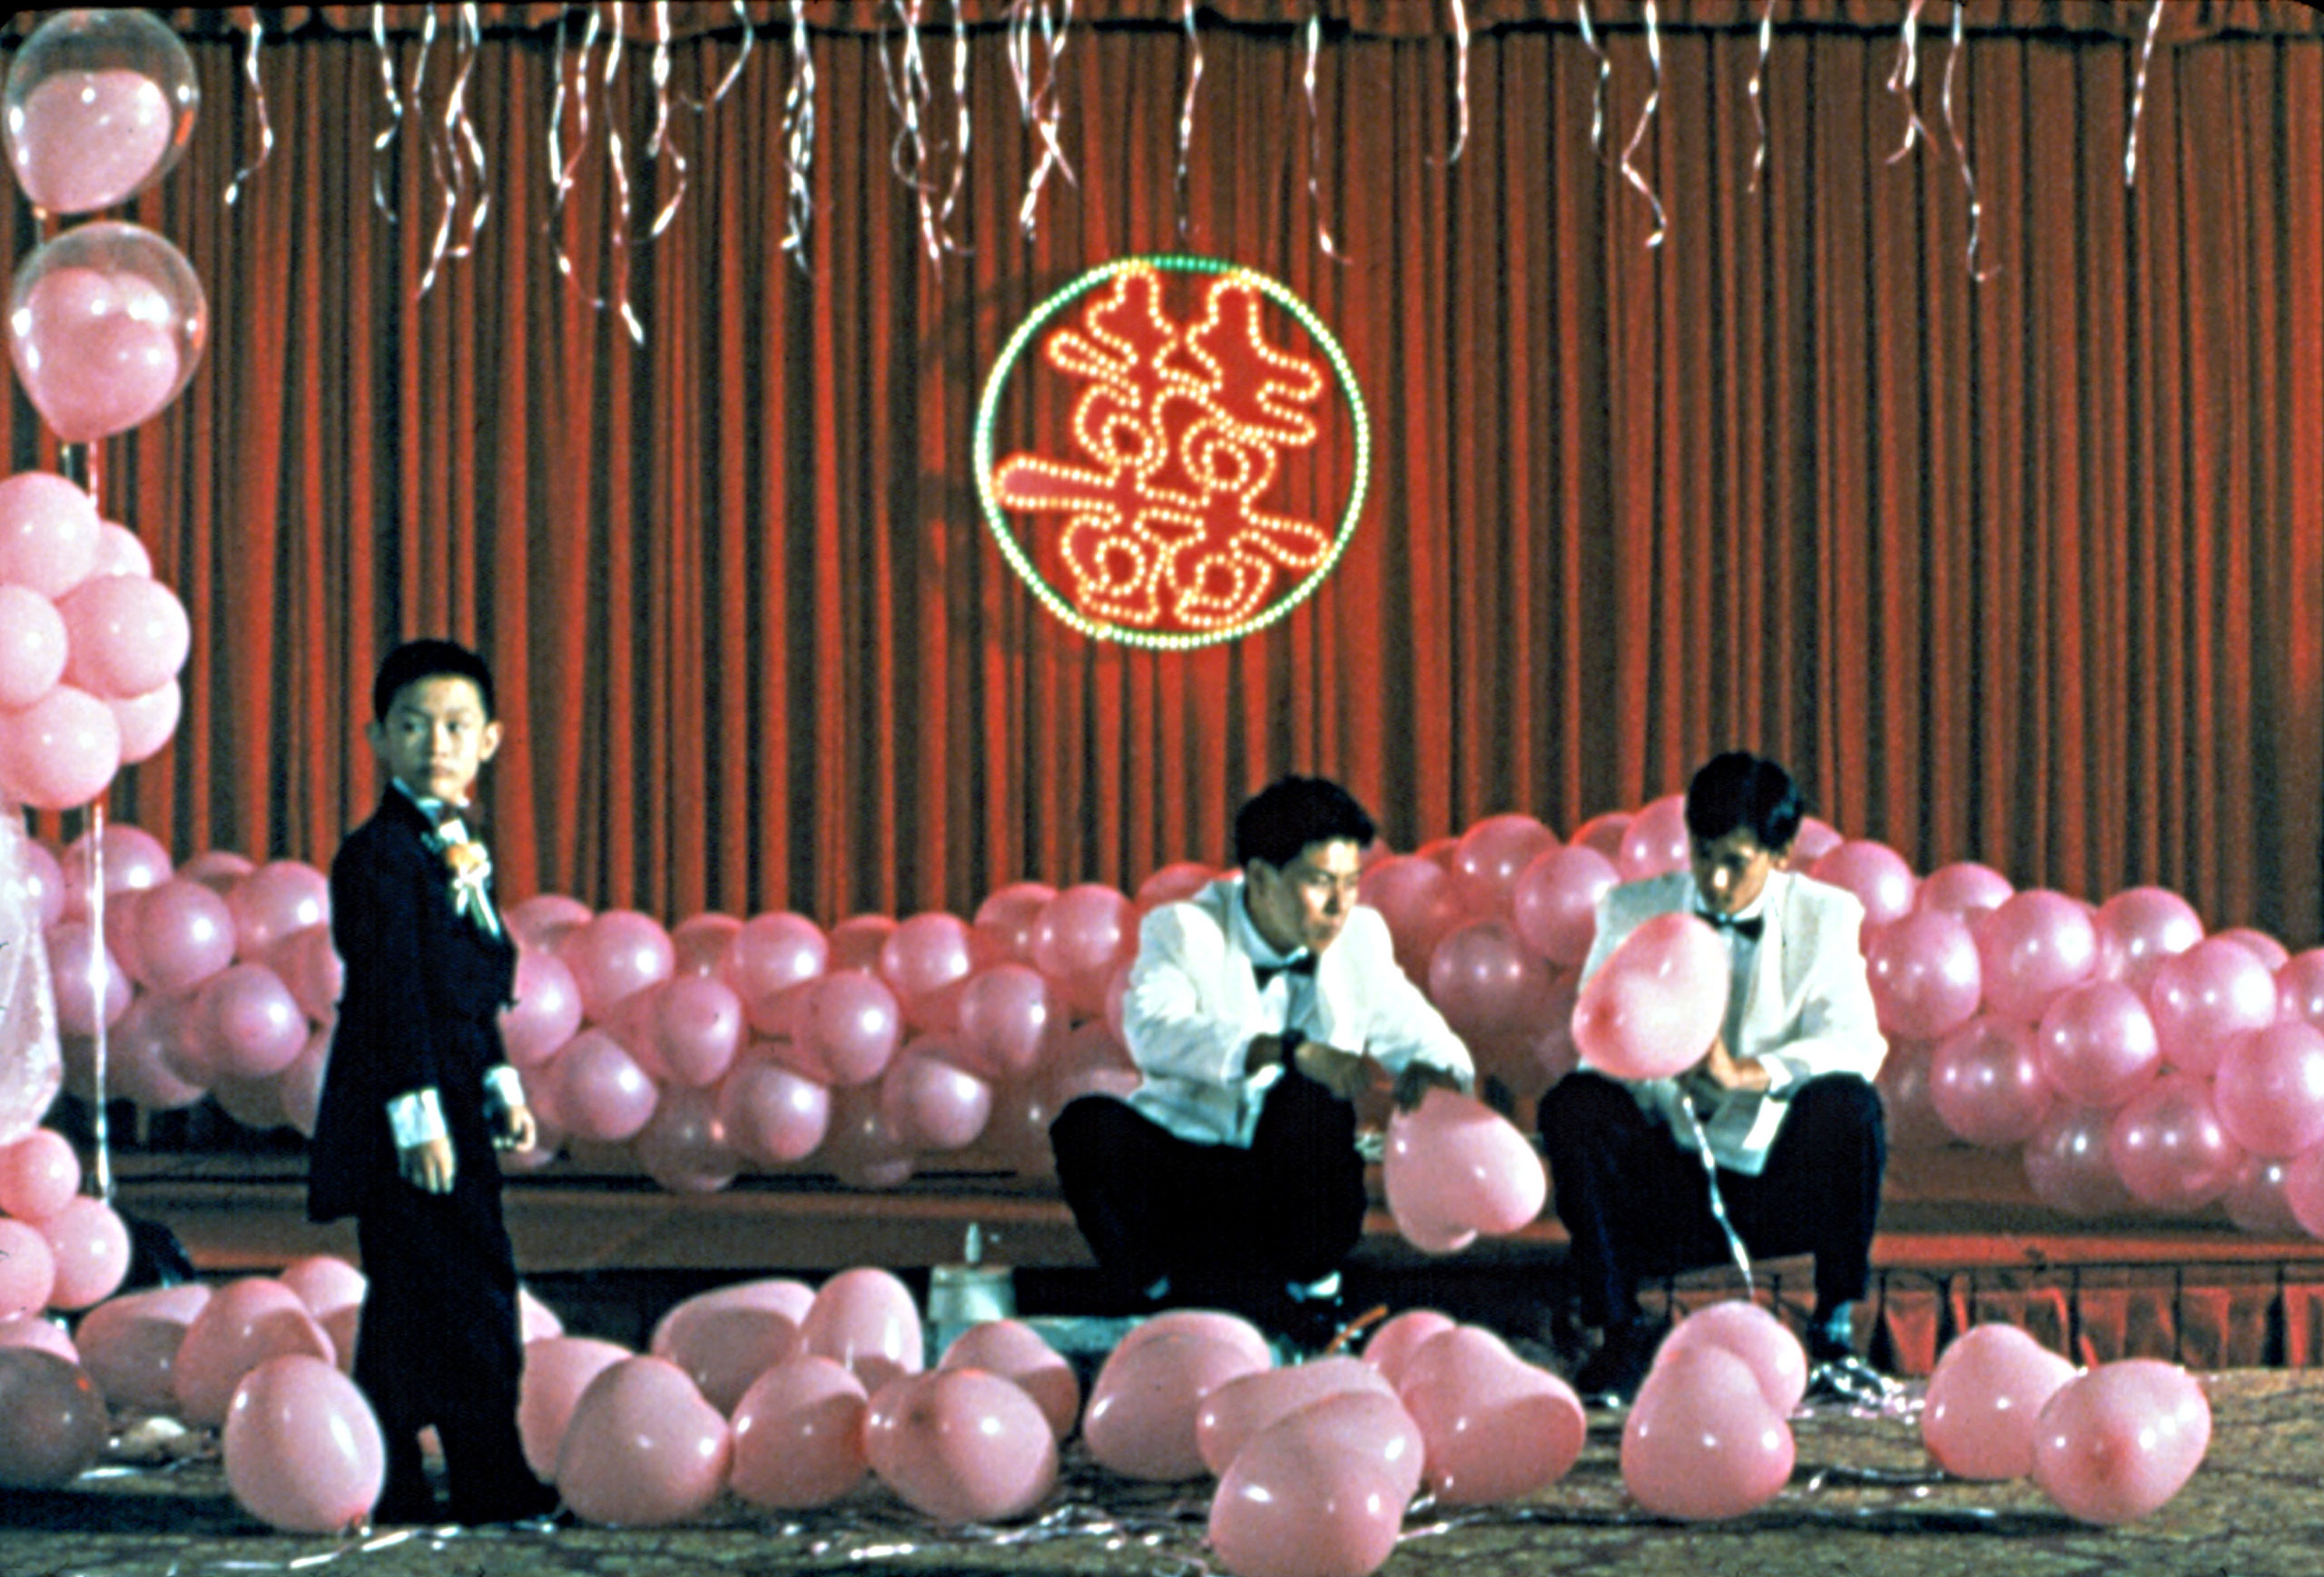 Jonathan Chang (left) in <i>Yi Yi: A One and a Two</i>. (Winstar Cinema/Everett Collection)